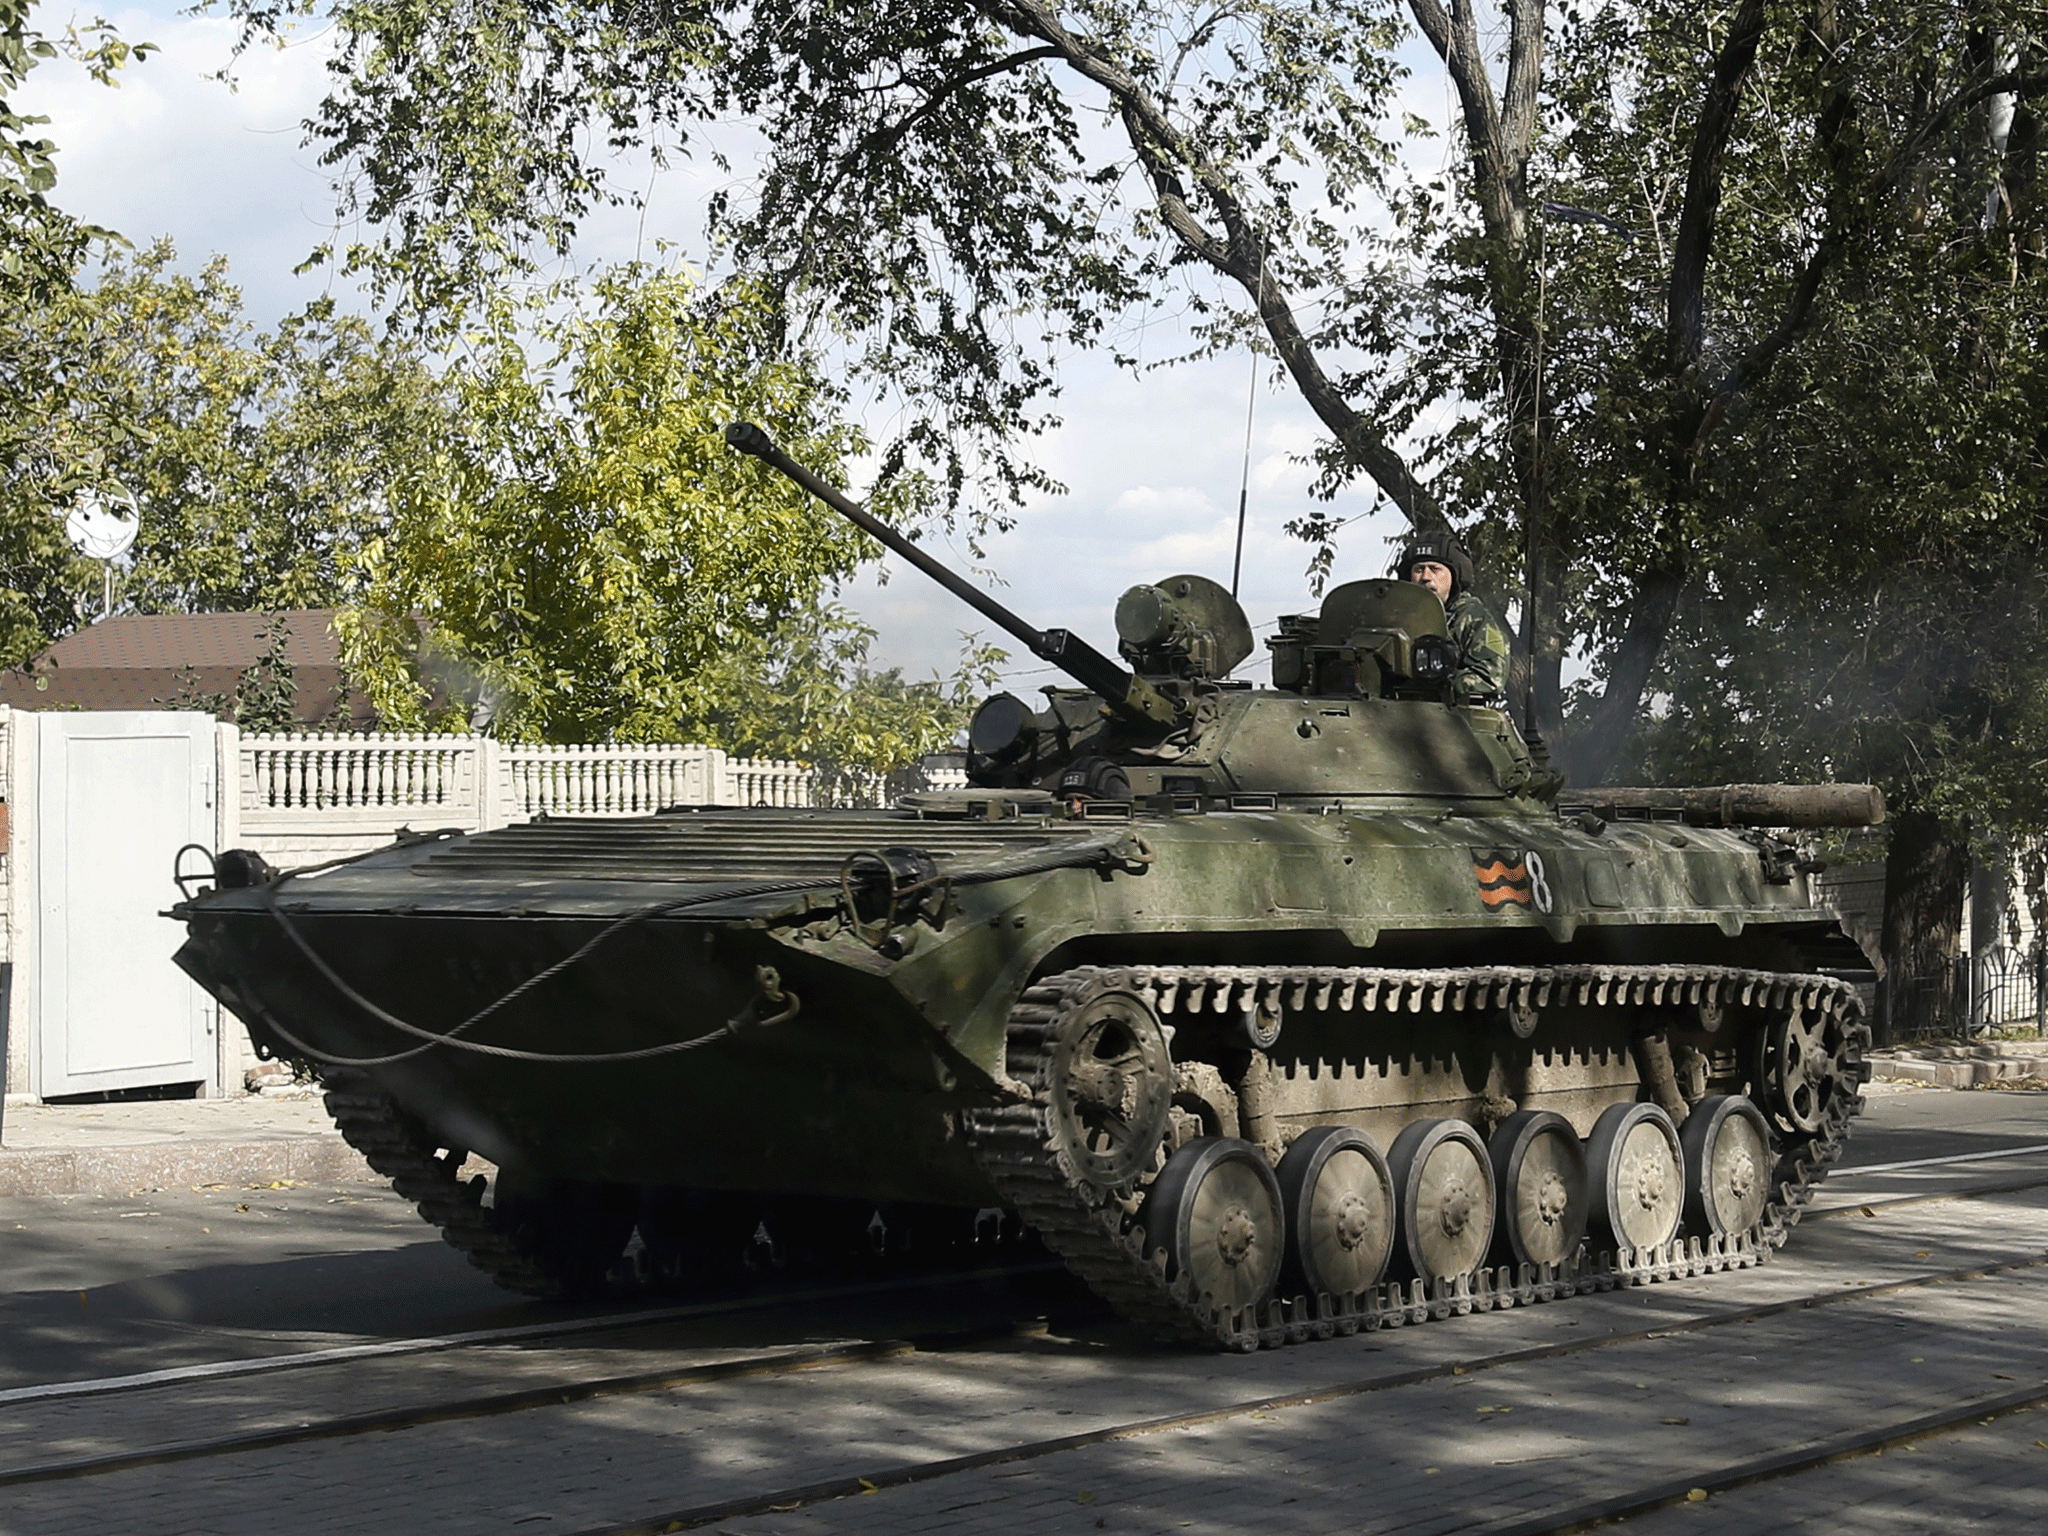 An armored personal carrier makes its way through the town of Donetsk, eastern Ukraine, on Wednesday, October 1